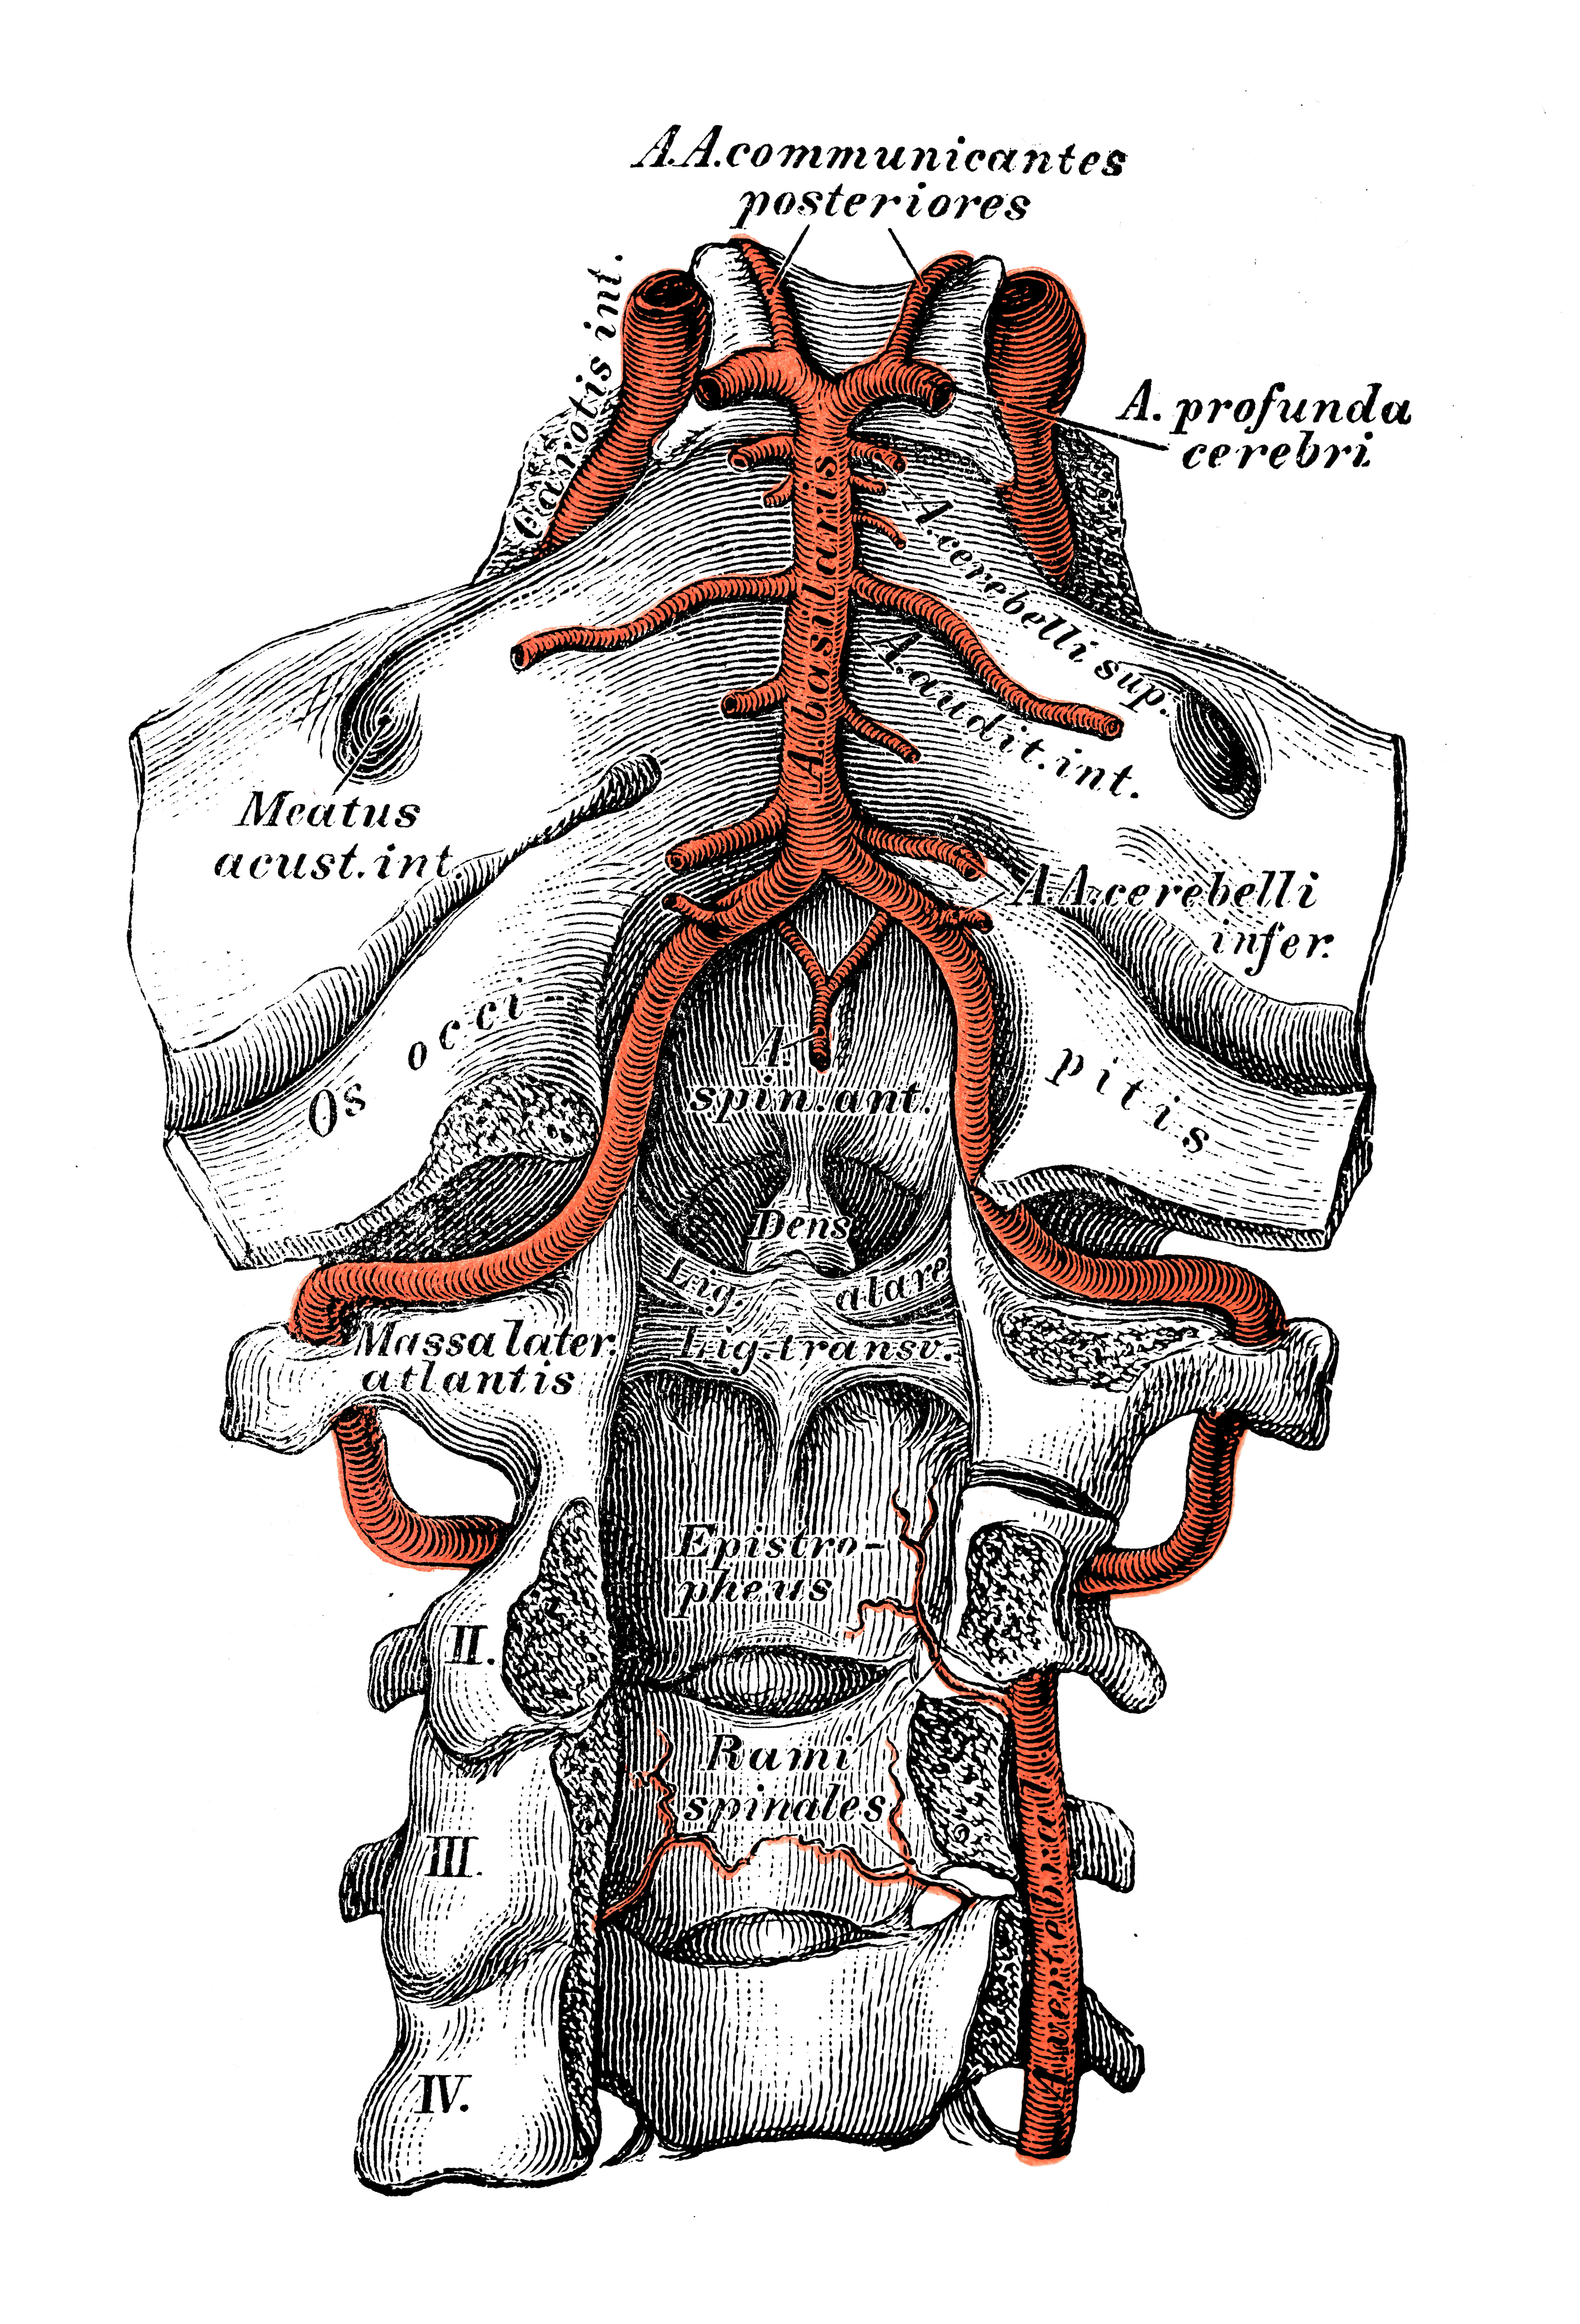 Anatomical drawing showing the vertebral arteries in the neck and spine